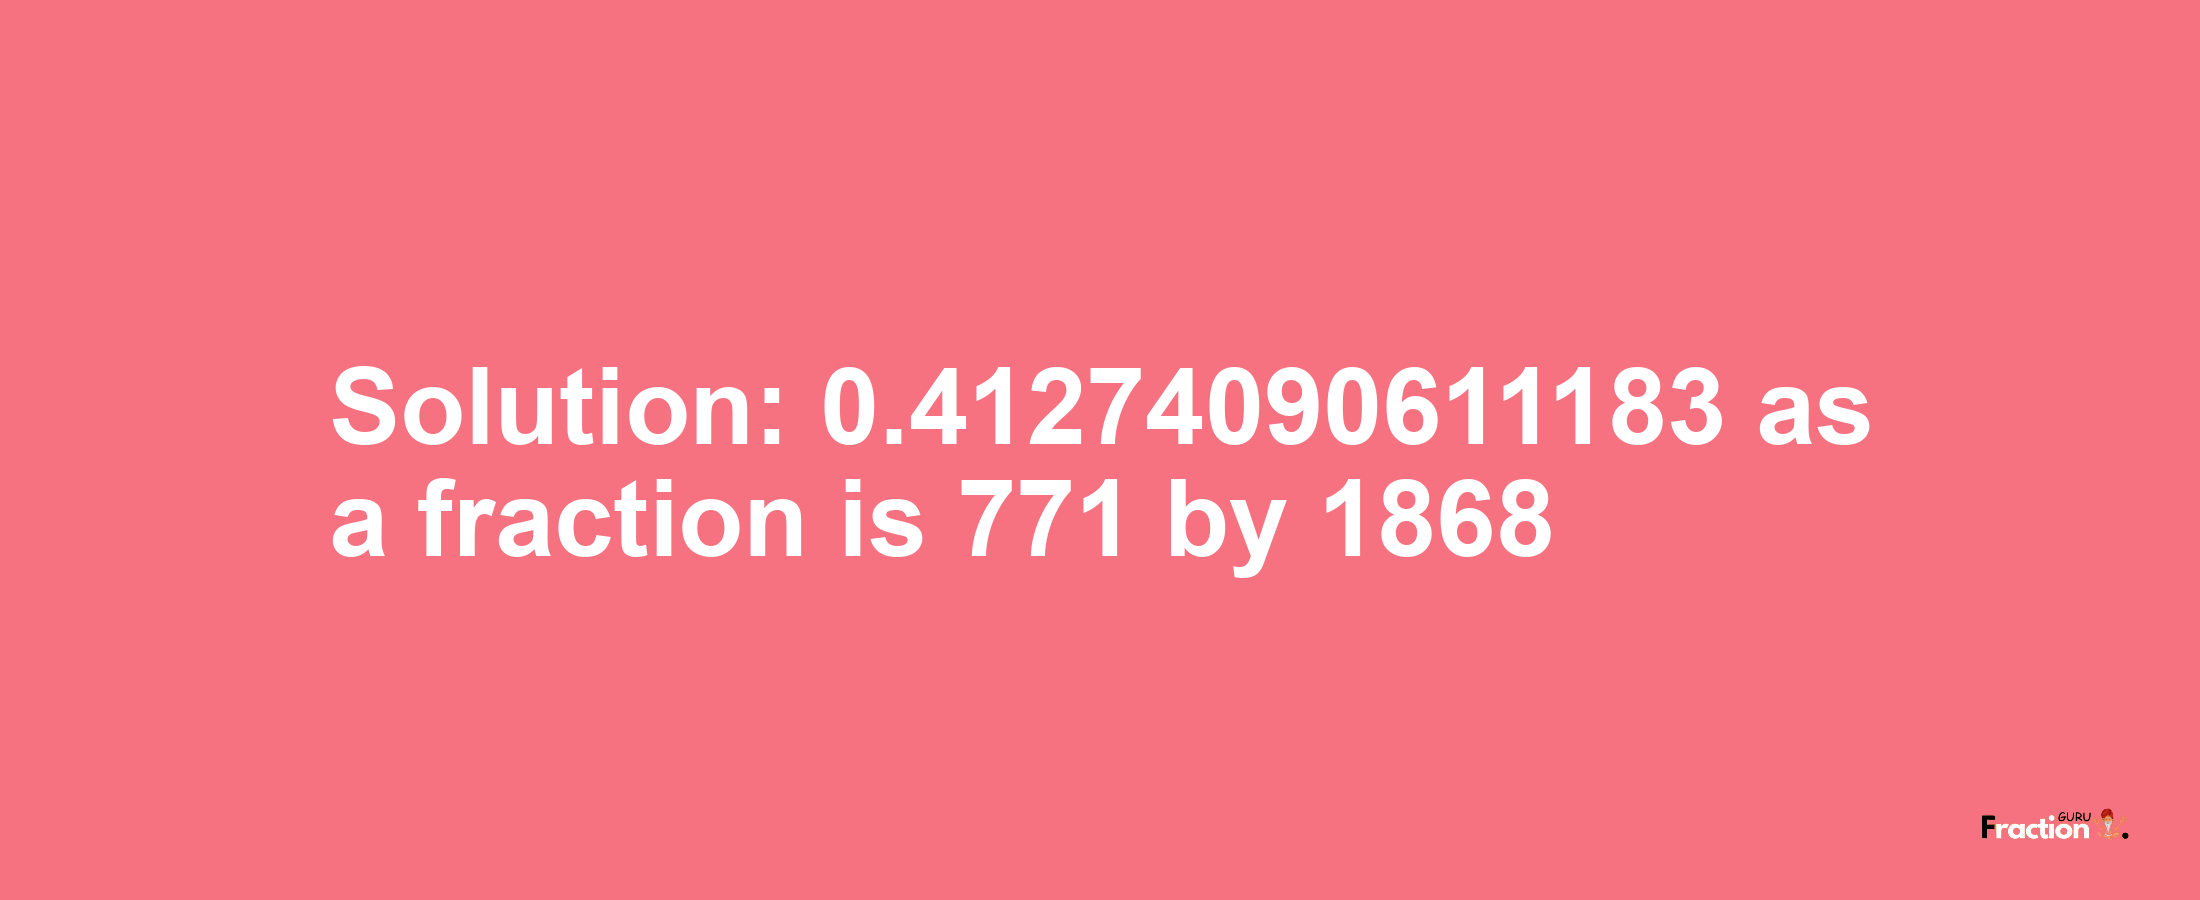 Solution:0.41274090611183 as a fraction is 771/1868